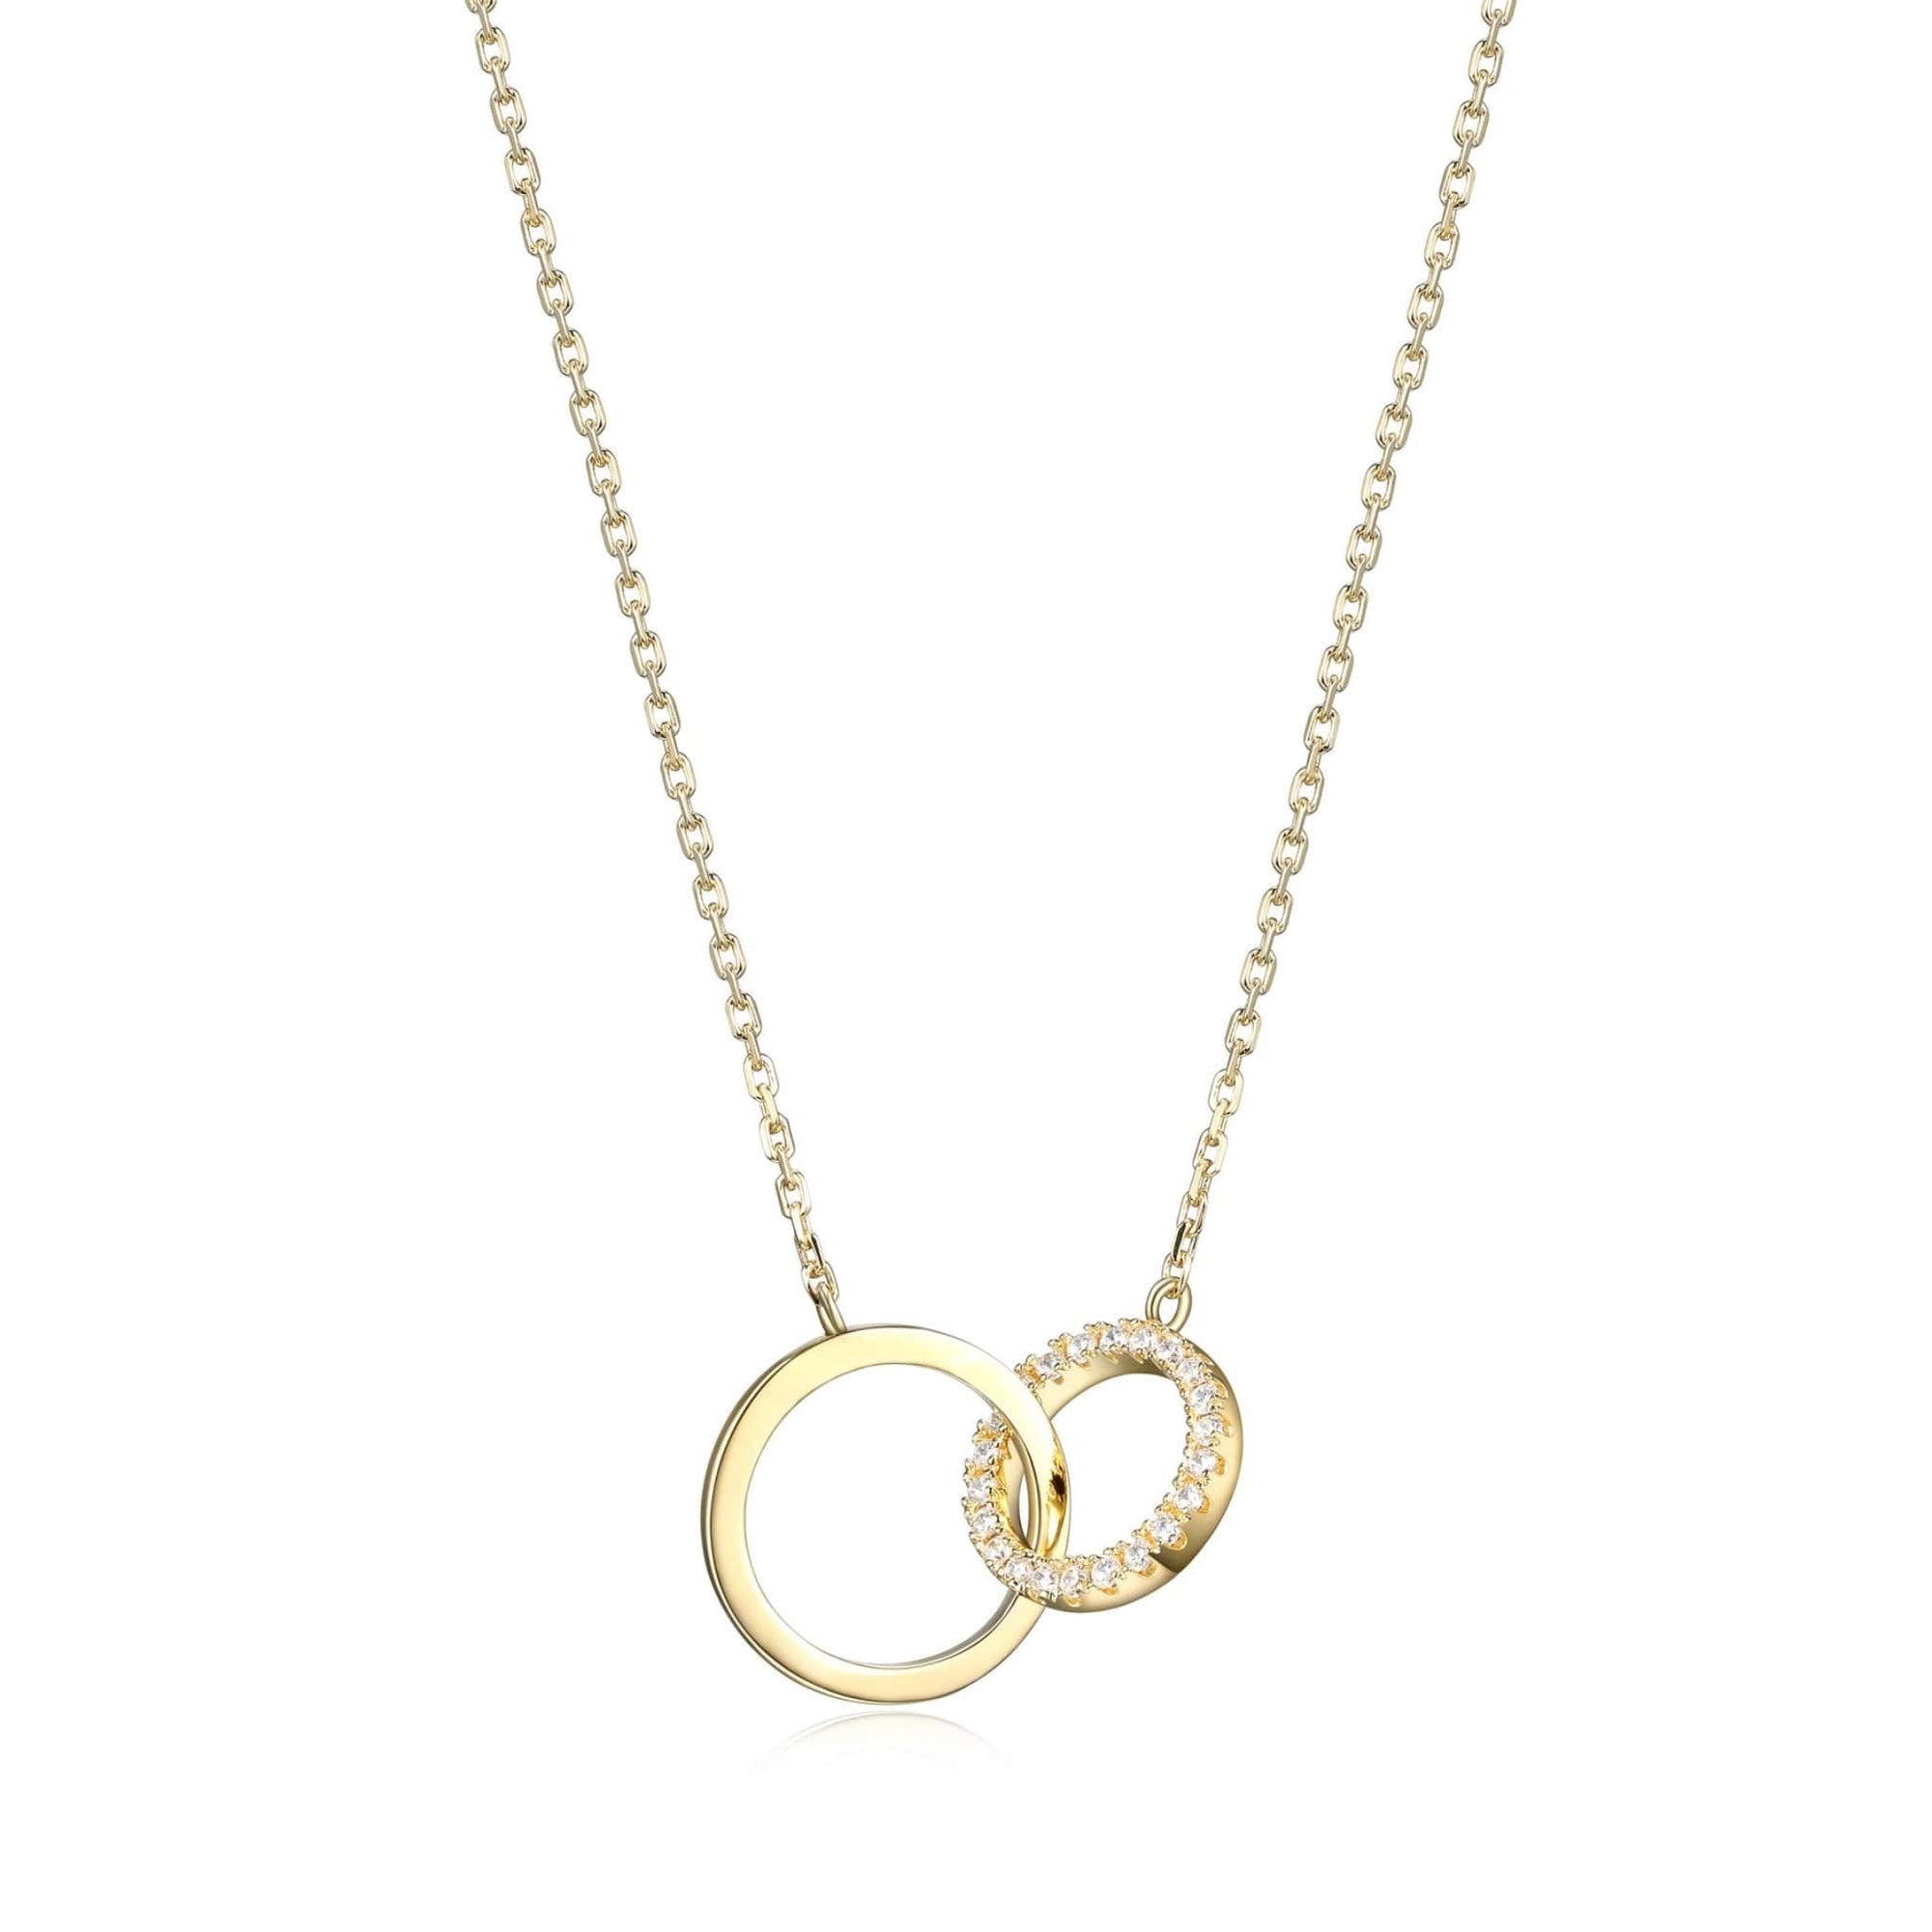 Interlocking Circle 18K Gold Plated Silver Necklace at Arman's Jewellers Kitchener